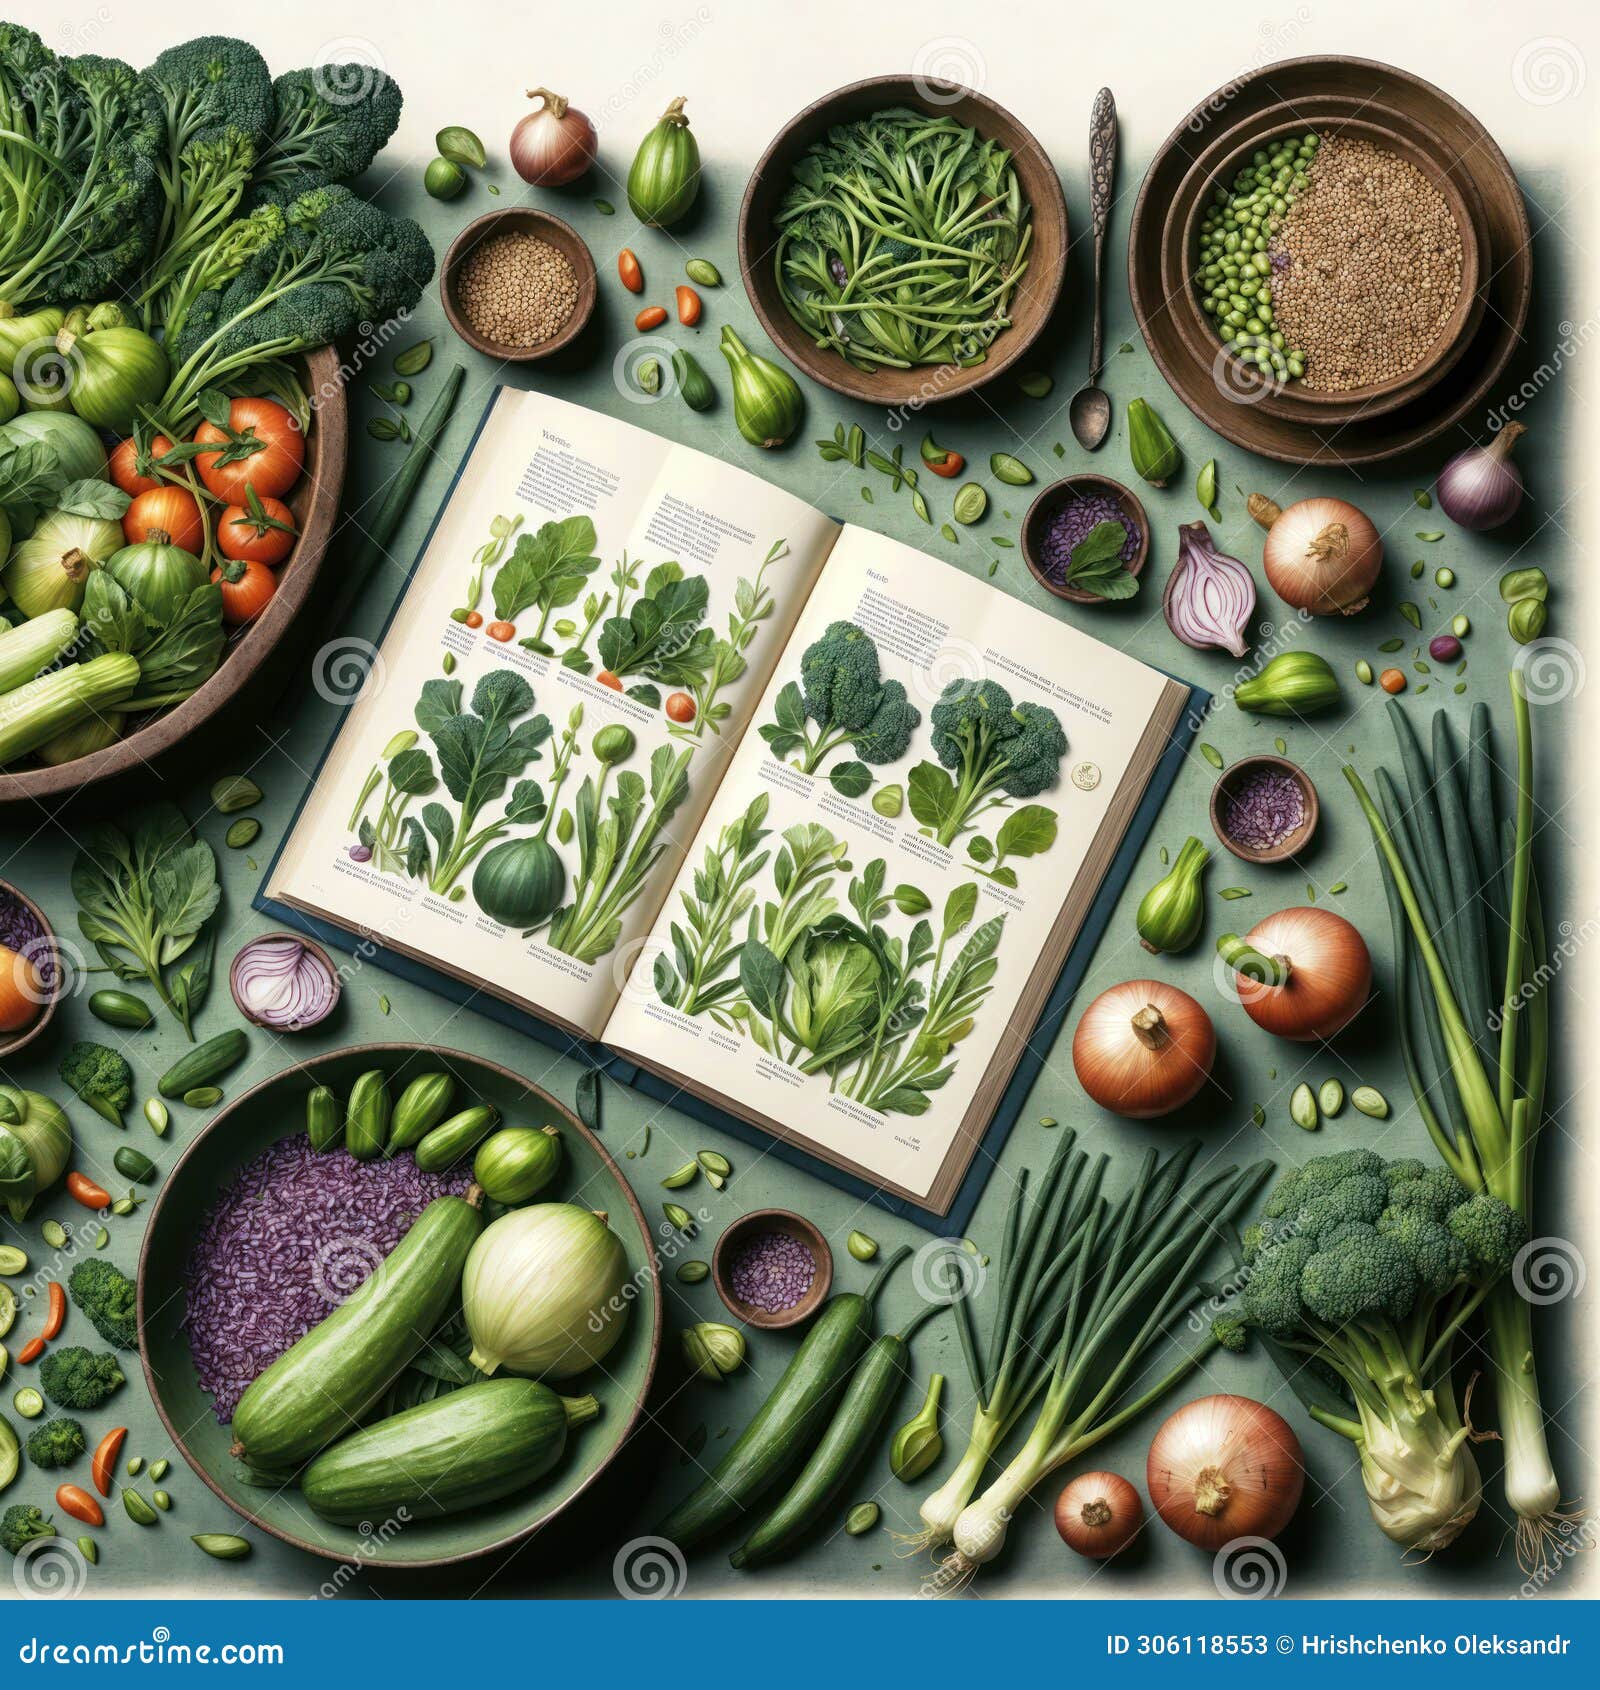 the collage consists of a large book with a variety of vegetables laid out on the dining table. predominantly green vegetables